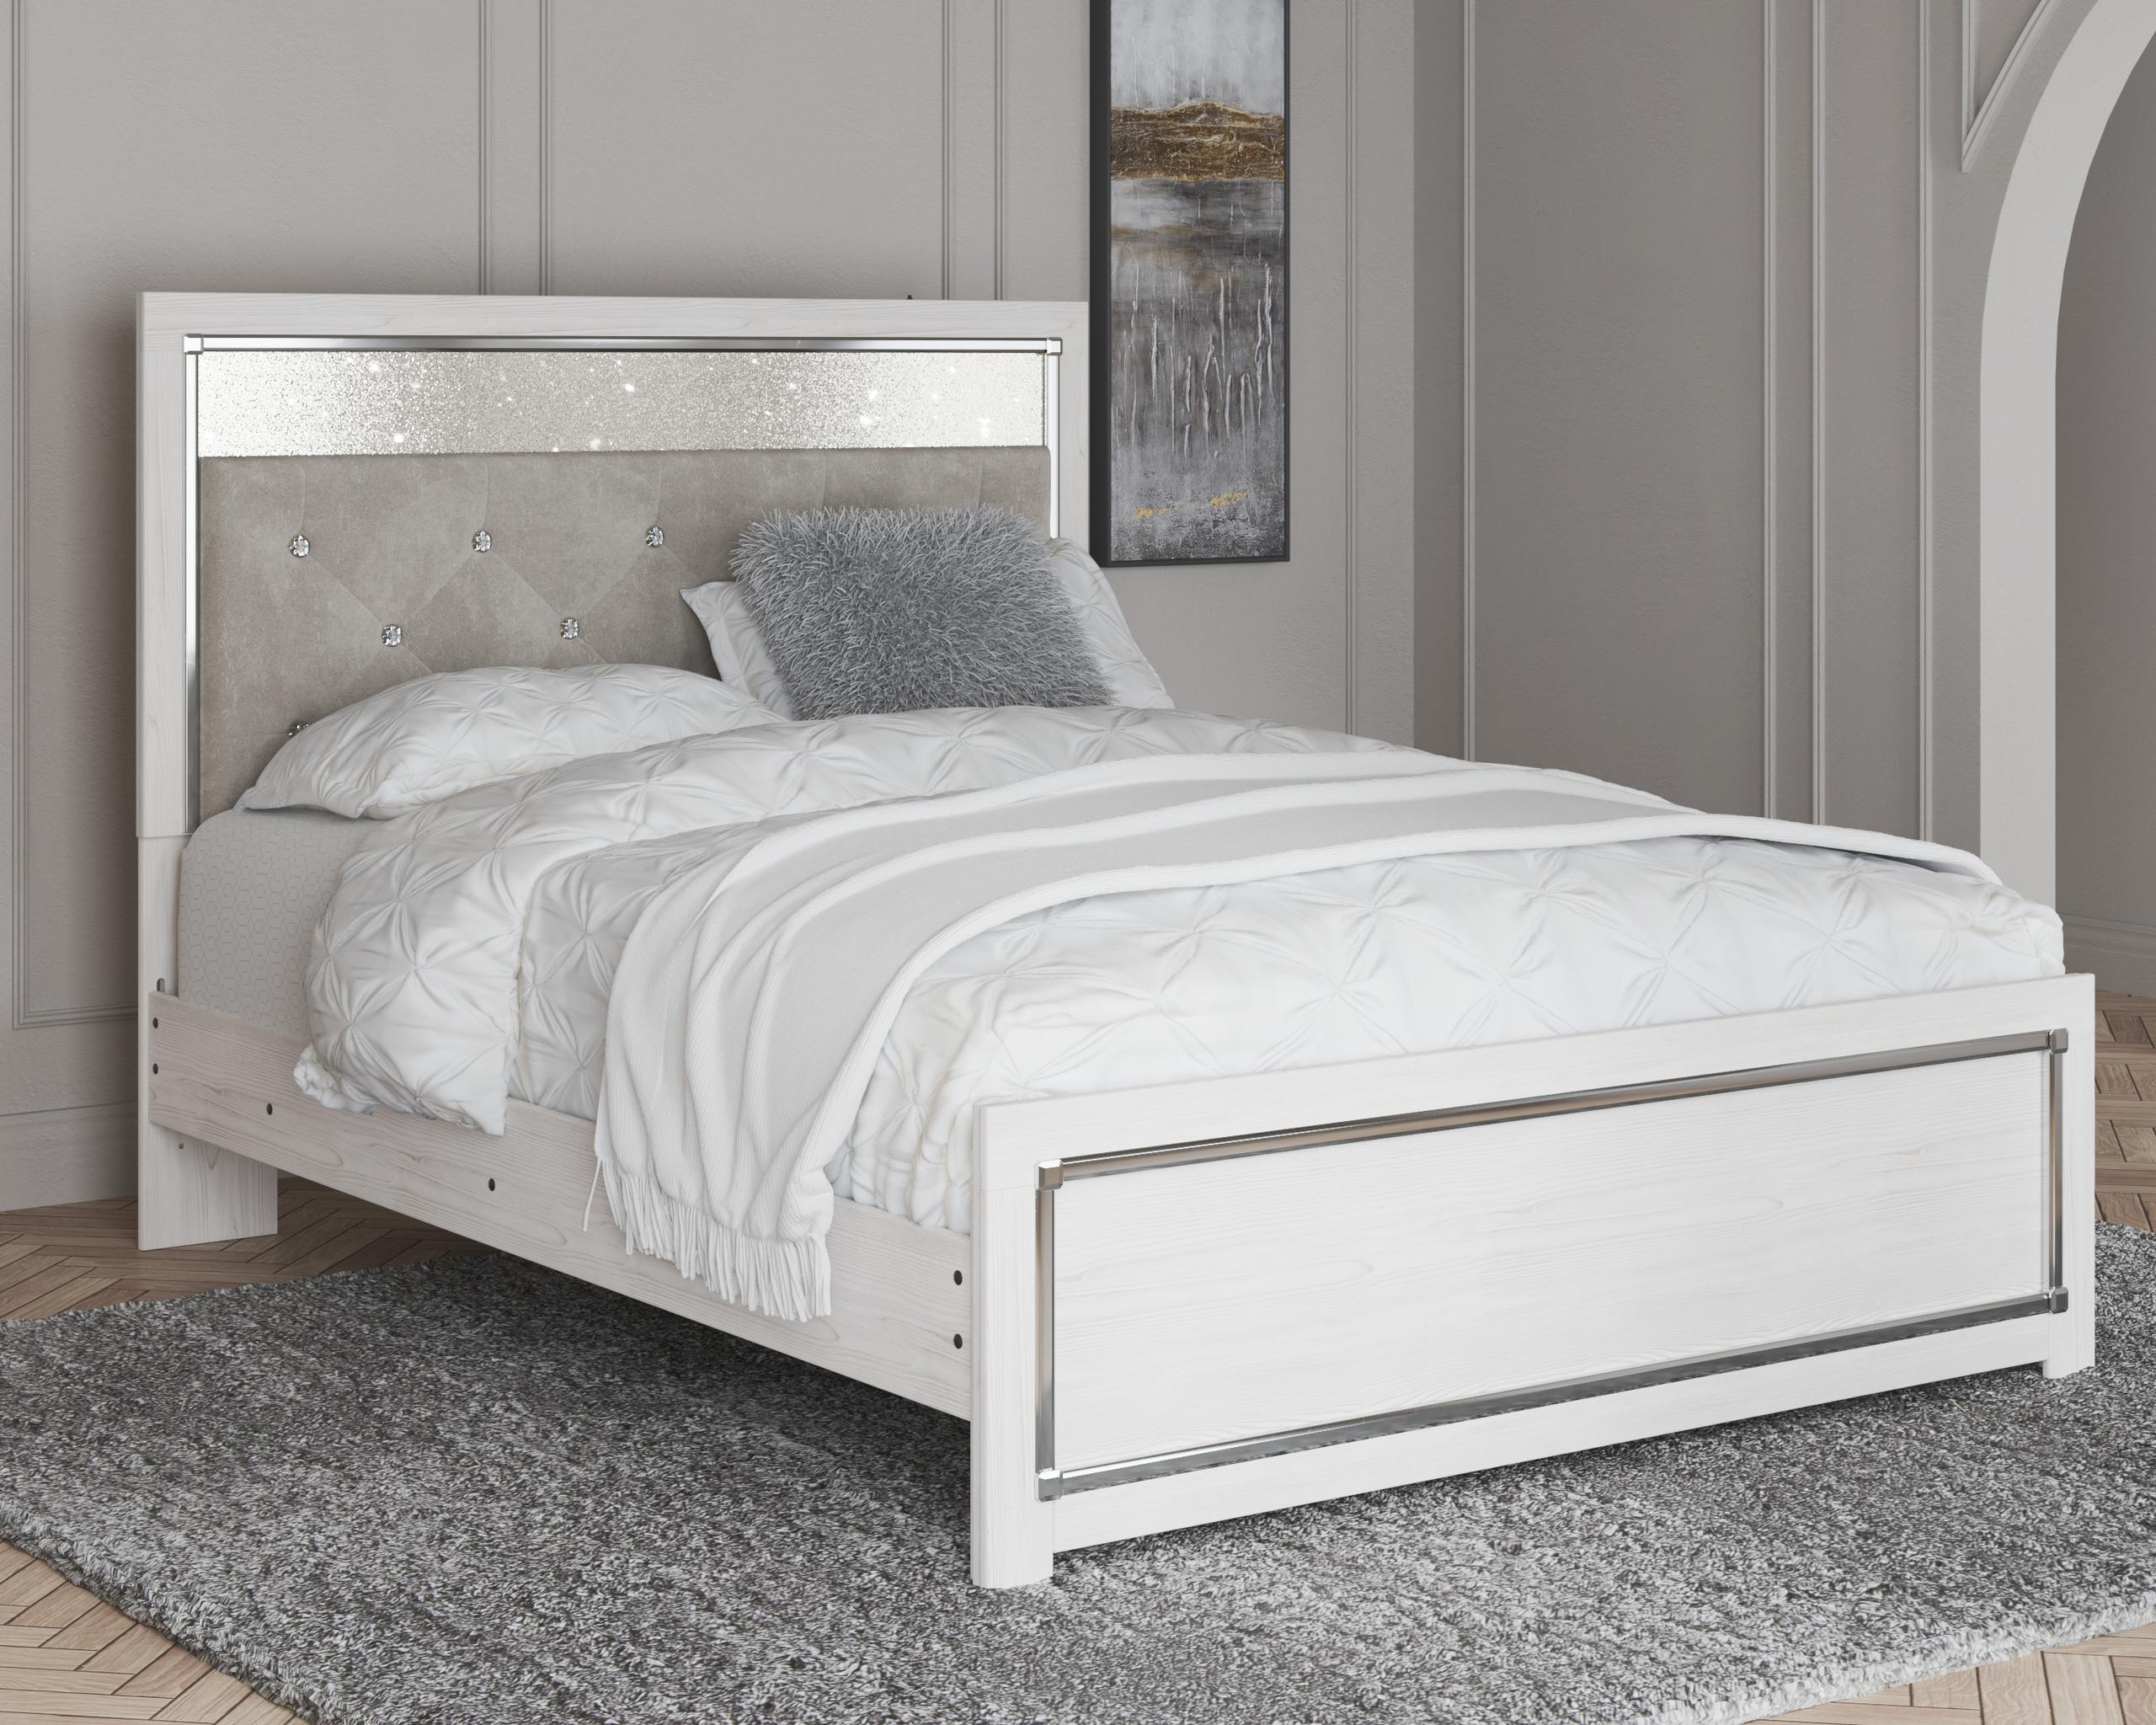 ASHLEY FURNITURE B2640B2 Altyra Queen Panel Bed